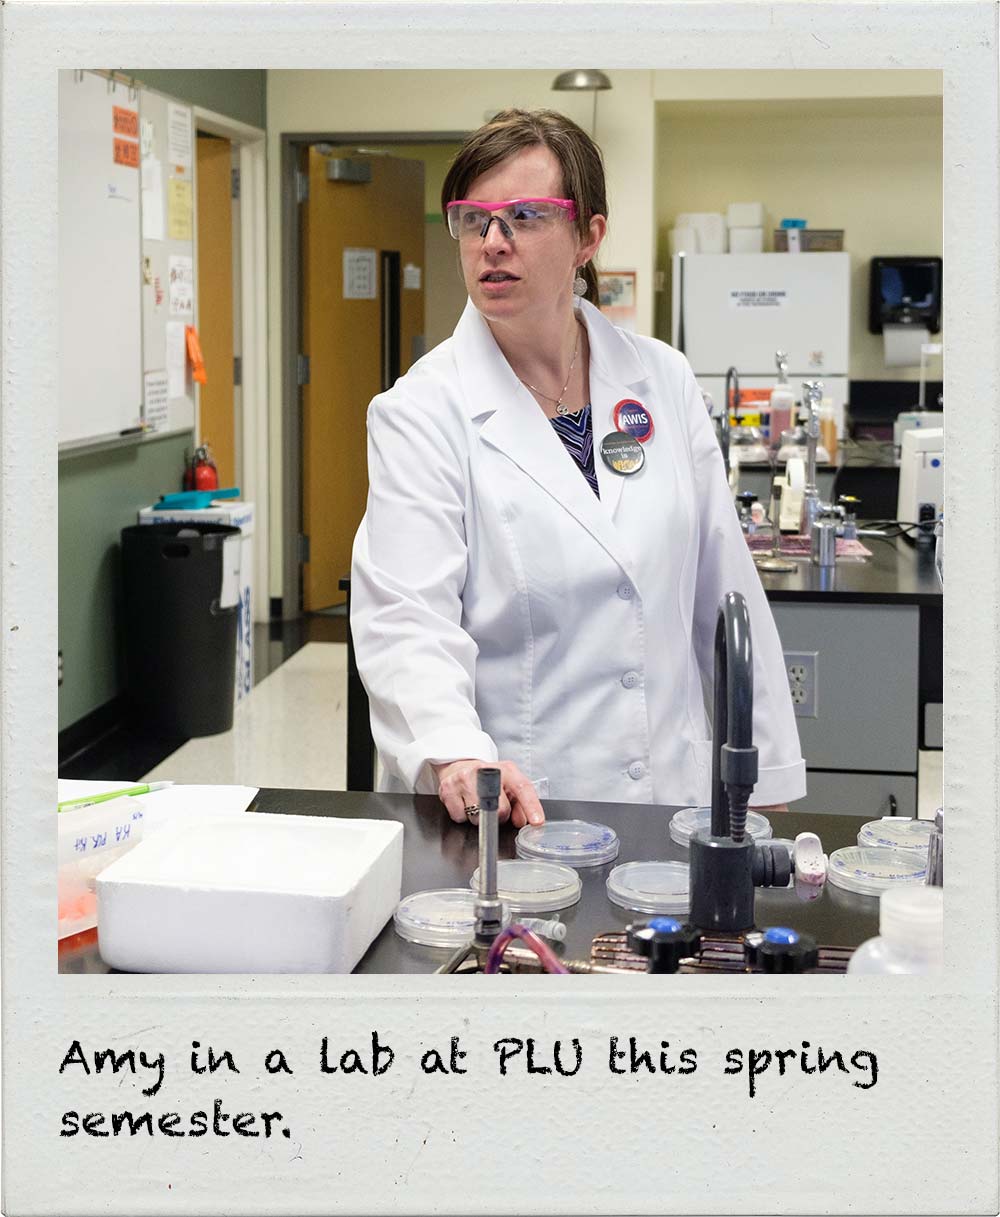 Amy in a lab at PLU this spring semester.